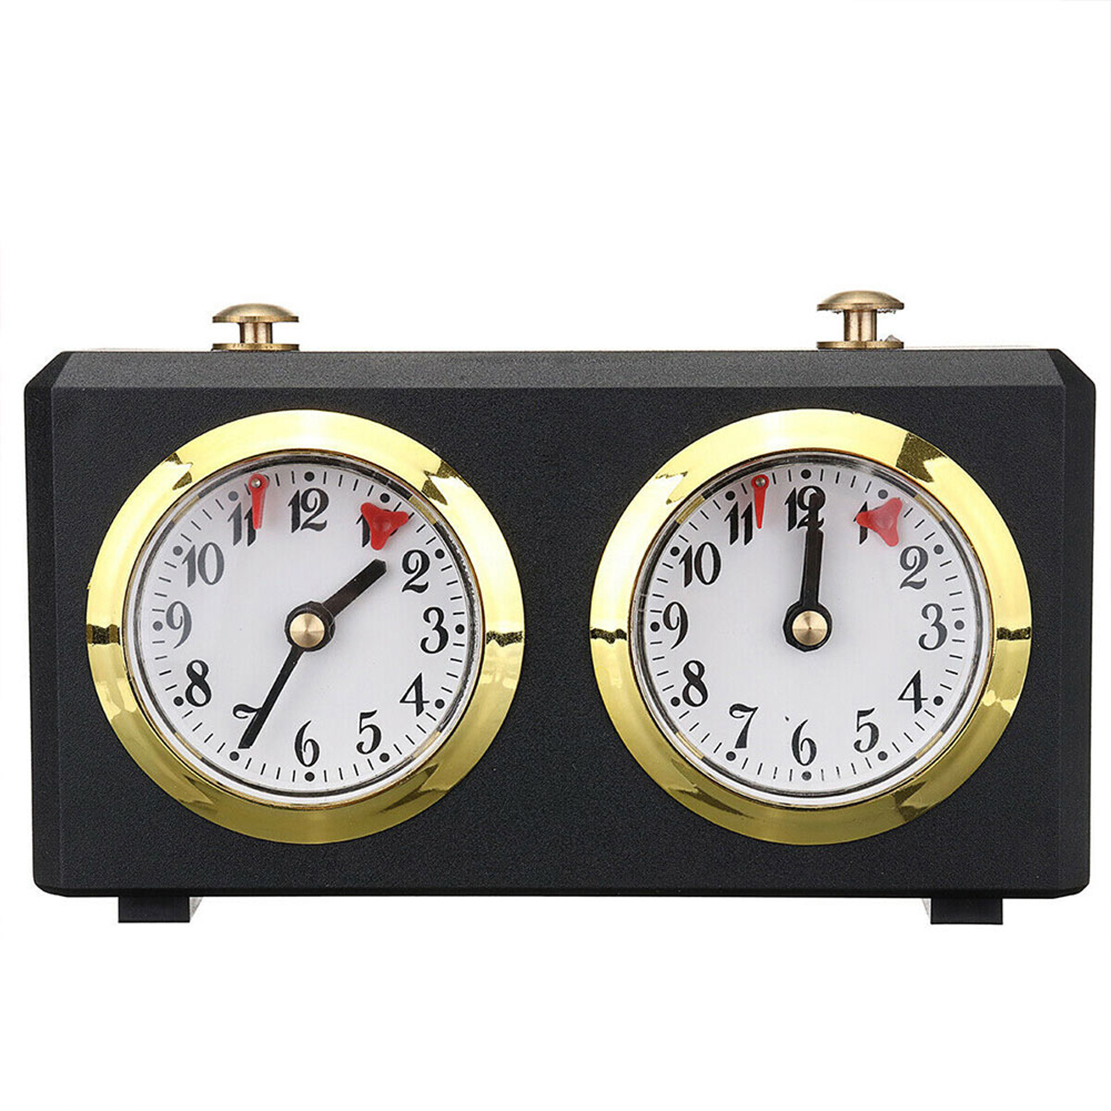 Chess Go Timer Professional Mechanical Analog Chess Clock Count Down Timer for Chinese Chess Board Game No Battery Need